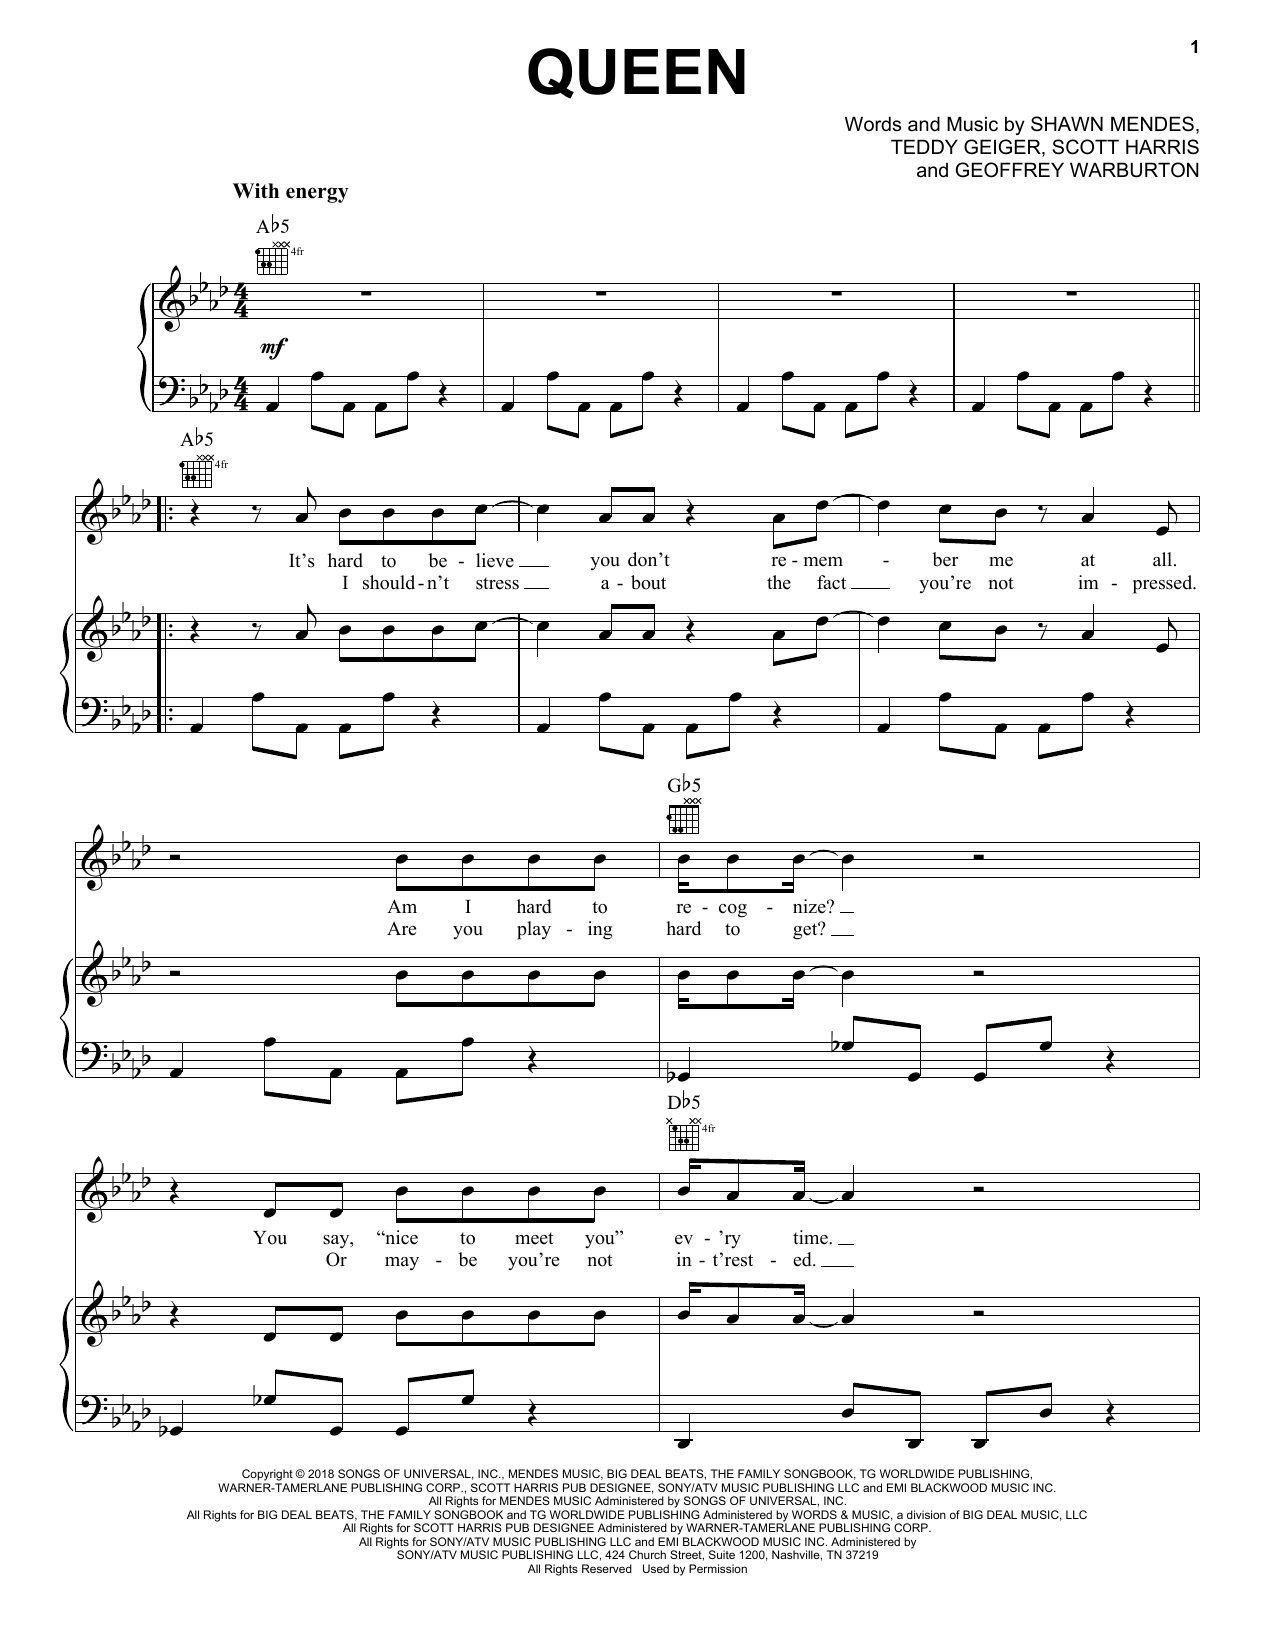 Download Shawn Mendes Queen Sheet Music